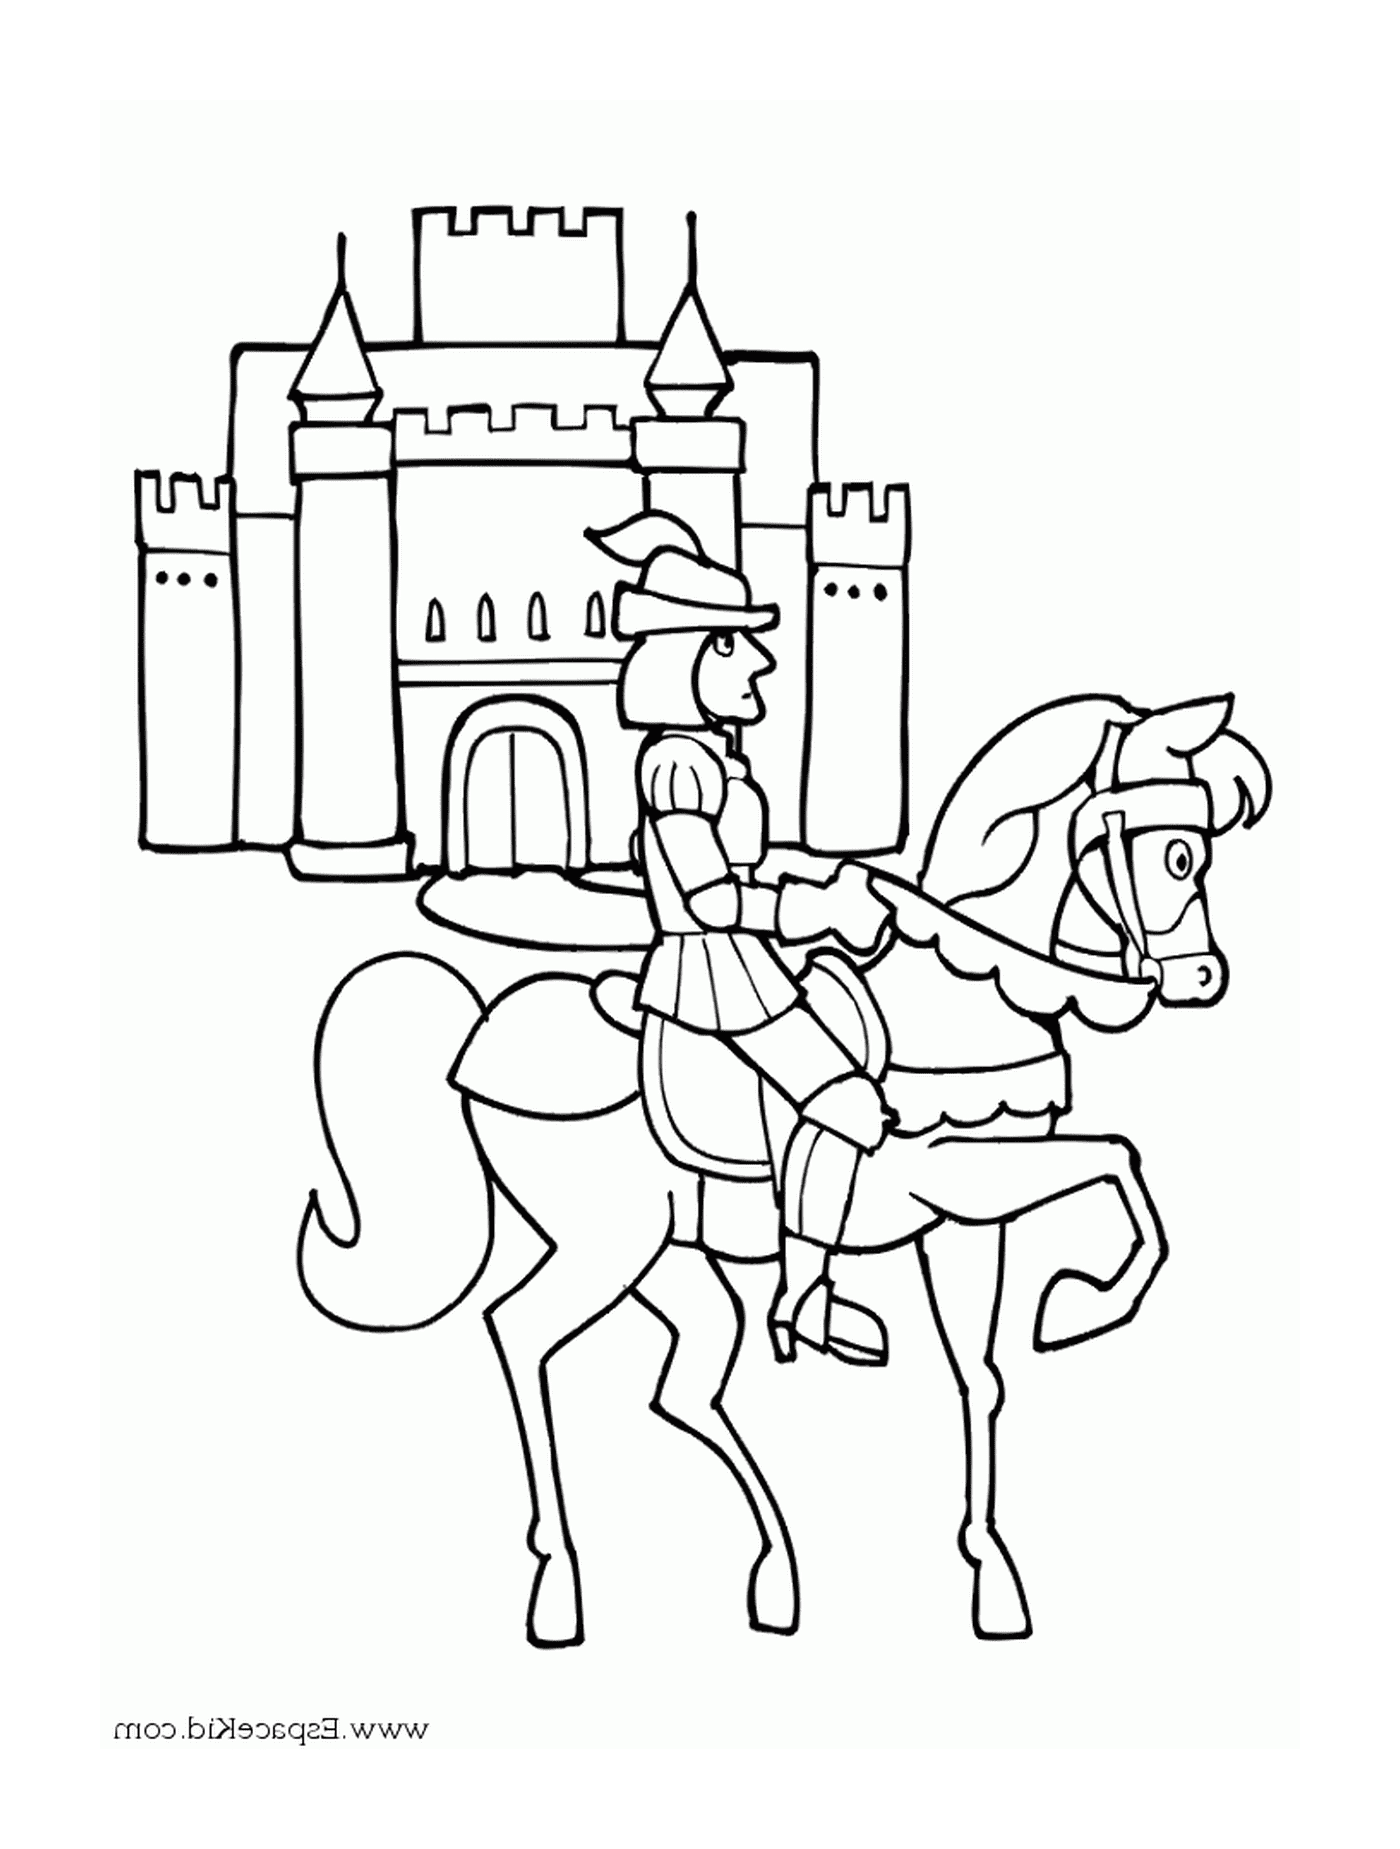  A man on horseback in front of a castle 